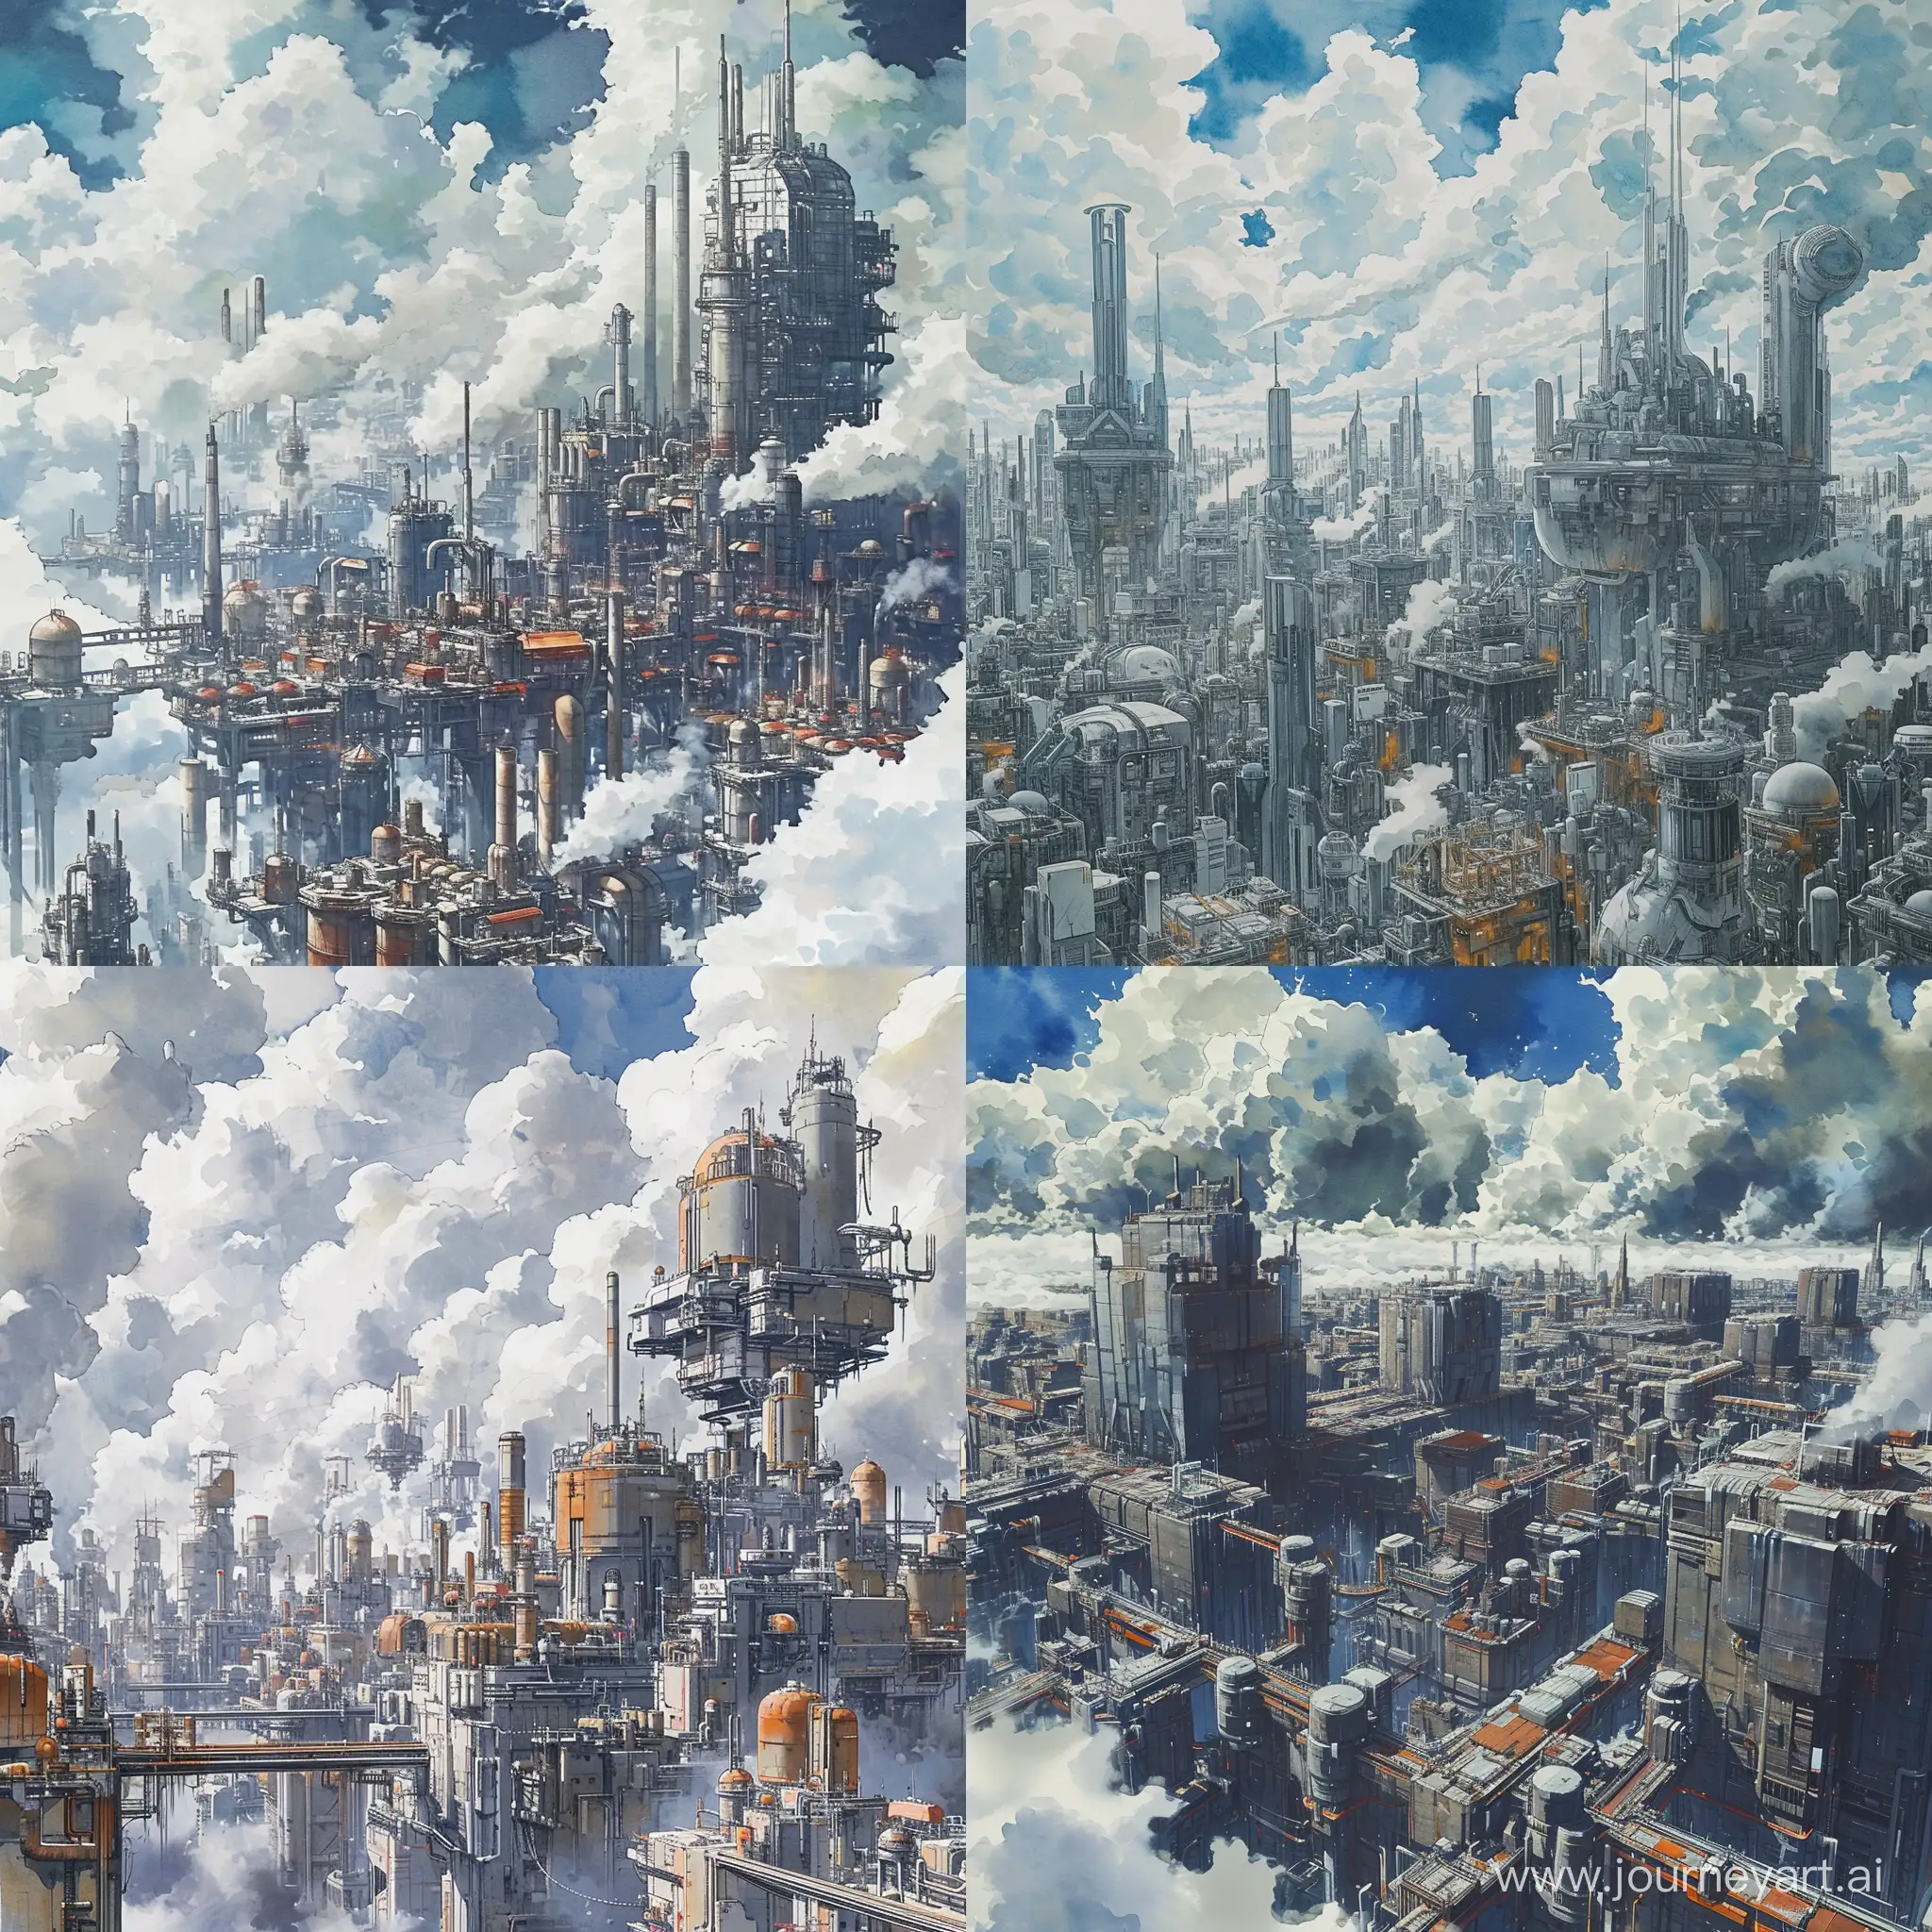 Futuristic-Anime-Cityscape-with-Metal-Buildings-and-Factories